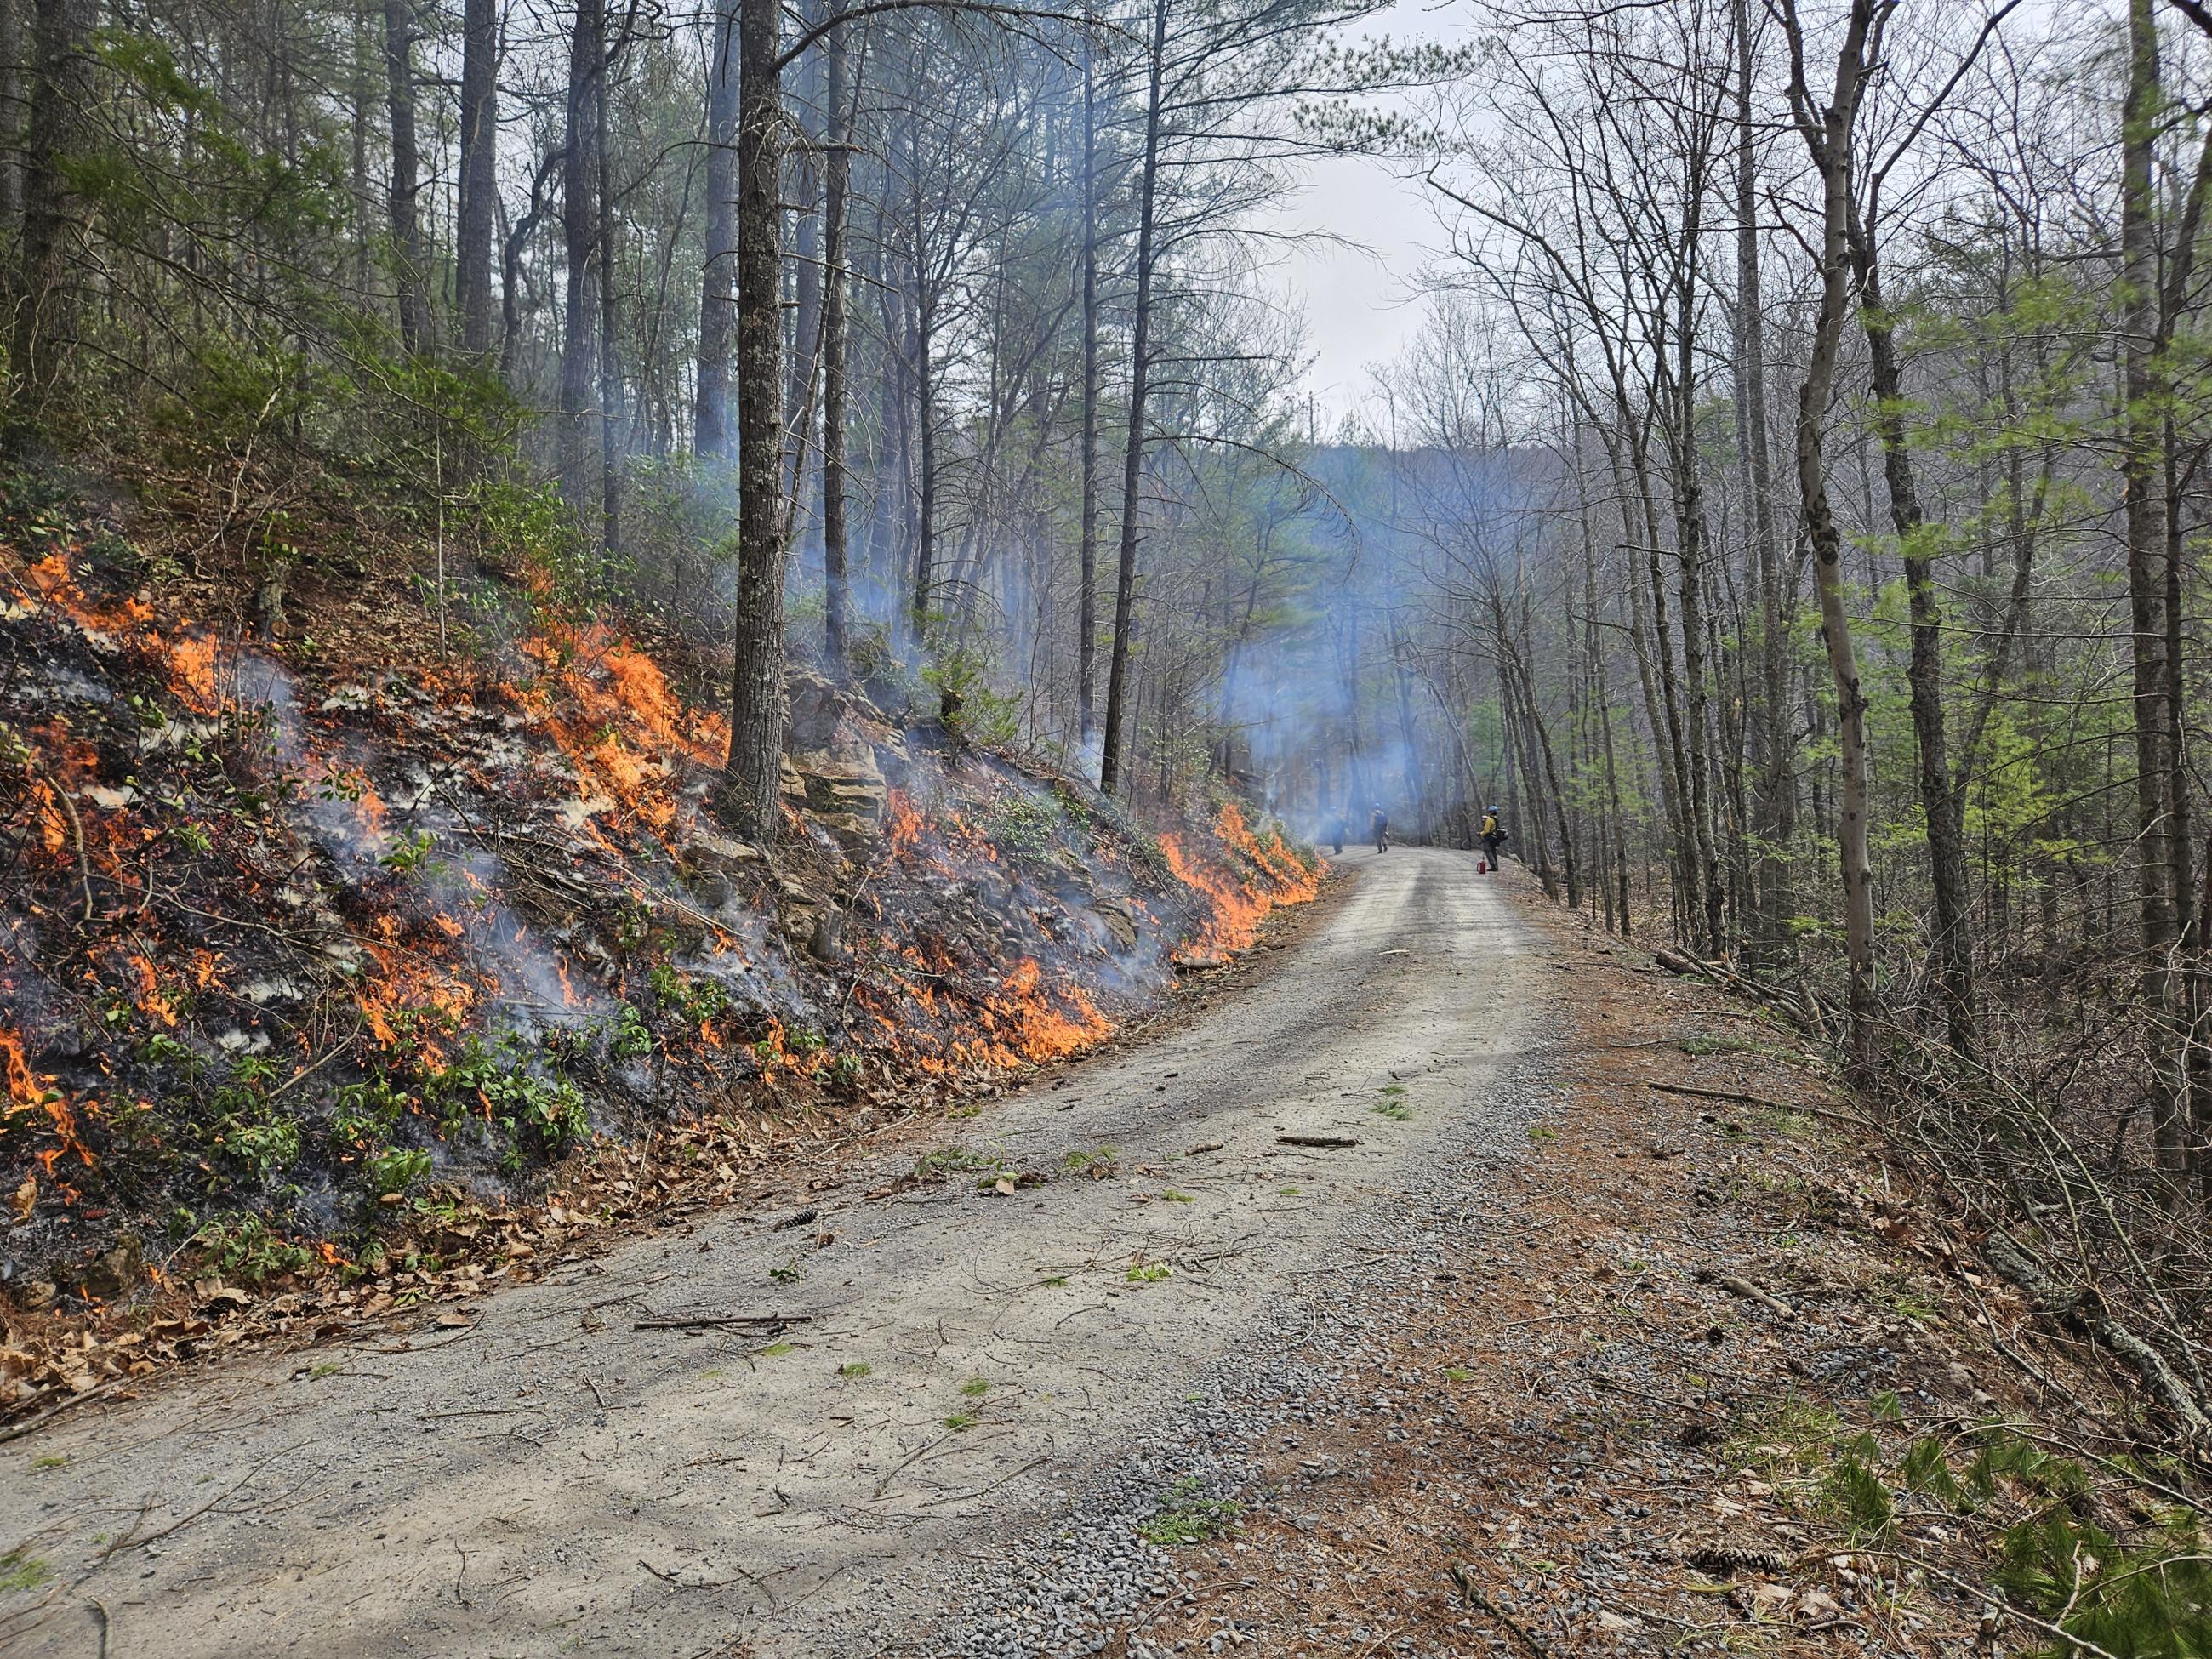 Forested slope with low flames at roadside with firefighters down the road